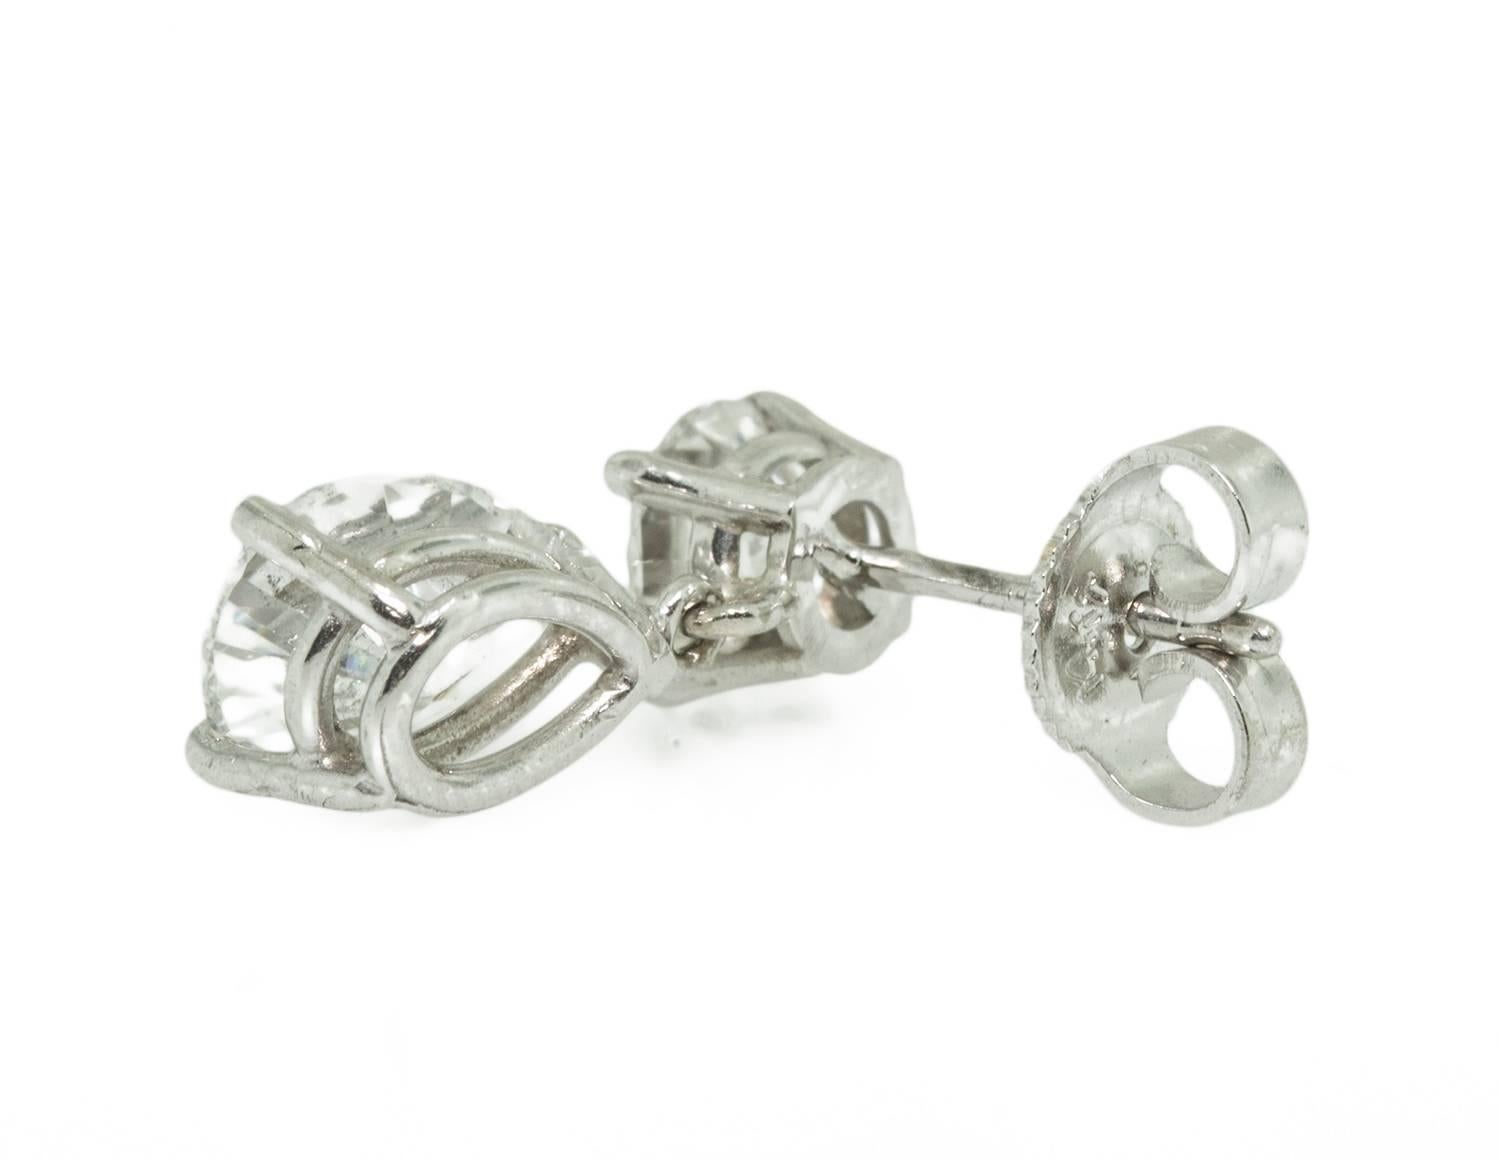 These charming earrings are set in 14k white gold. They dangle and flutter when worn allowing light to dance through each earring.The pear shapes each weigh 1 ct, G-H colour and SI1-I1 clarity. The top round brilliant diamond weigh .50 ct. each and